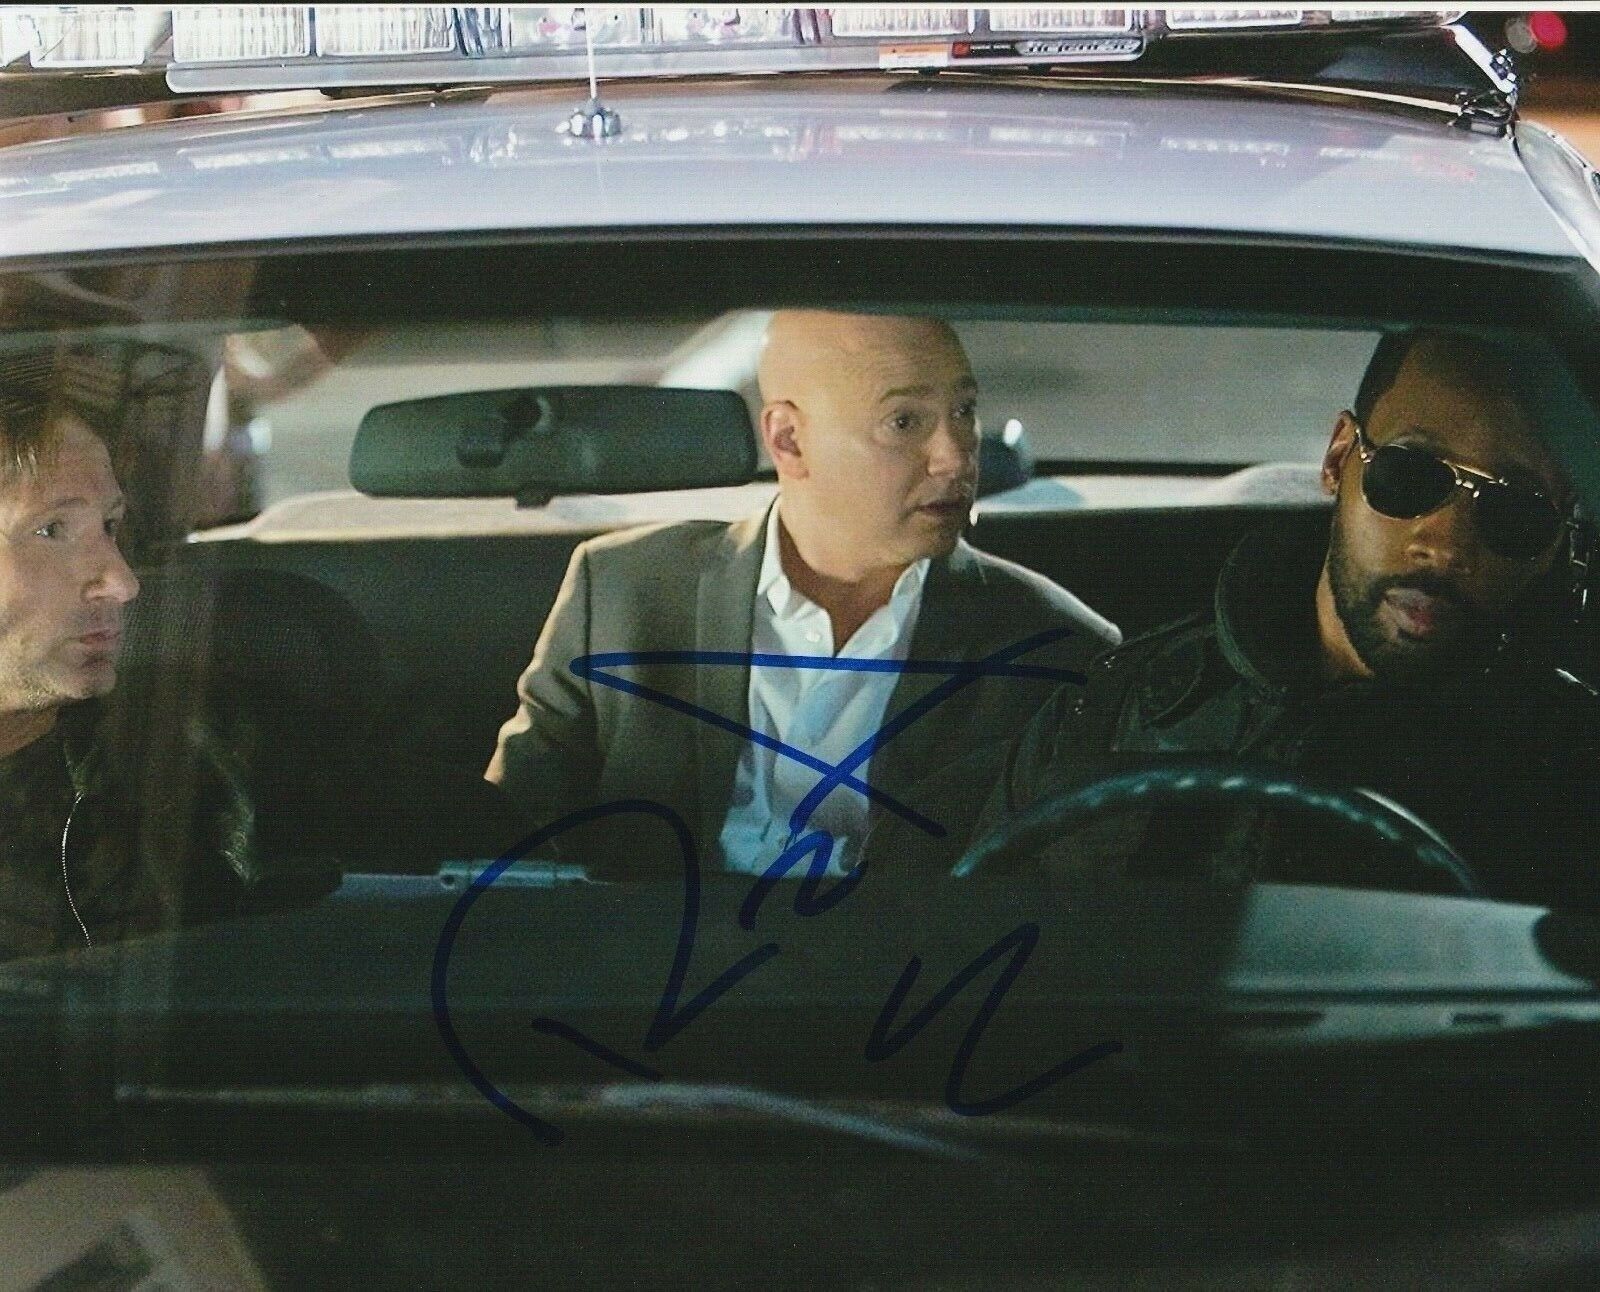 * RZA * signed autographed 8x10 Photo Poster painting * WU TANG CLAN * BRICK MANSIONS * 4